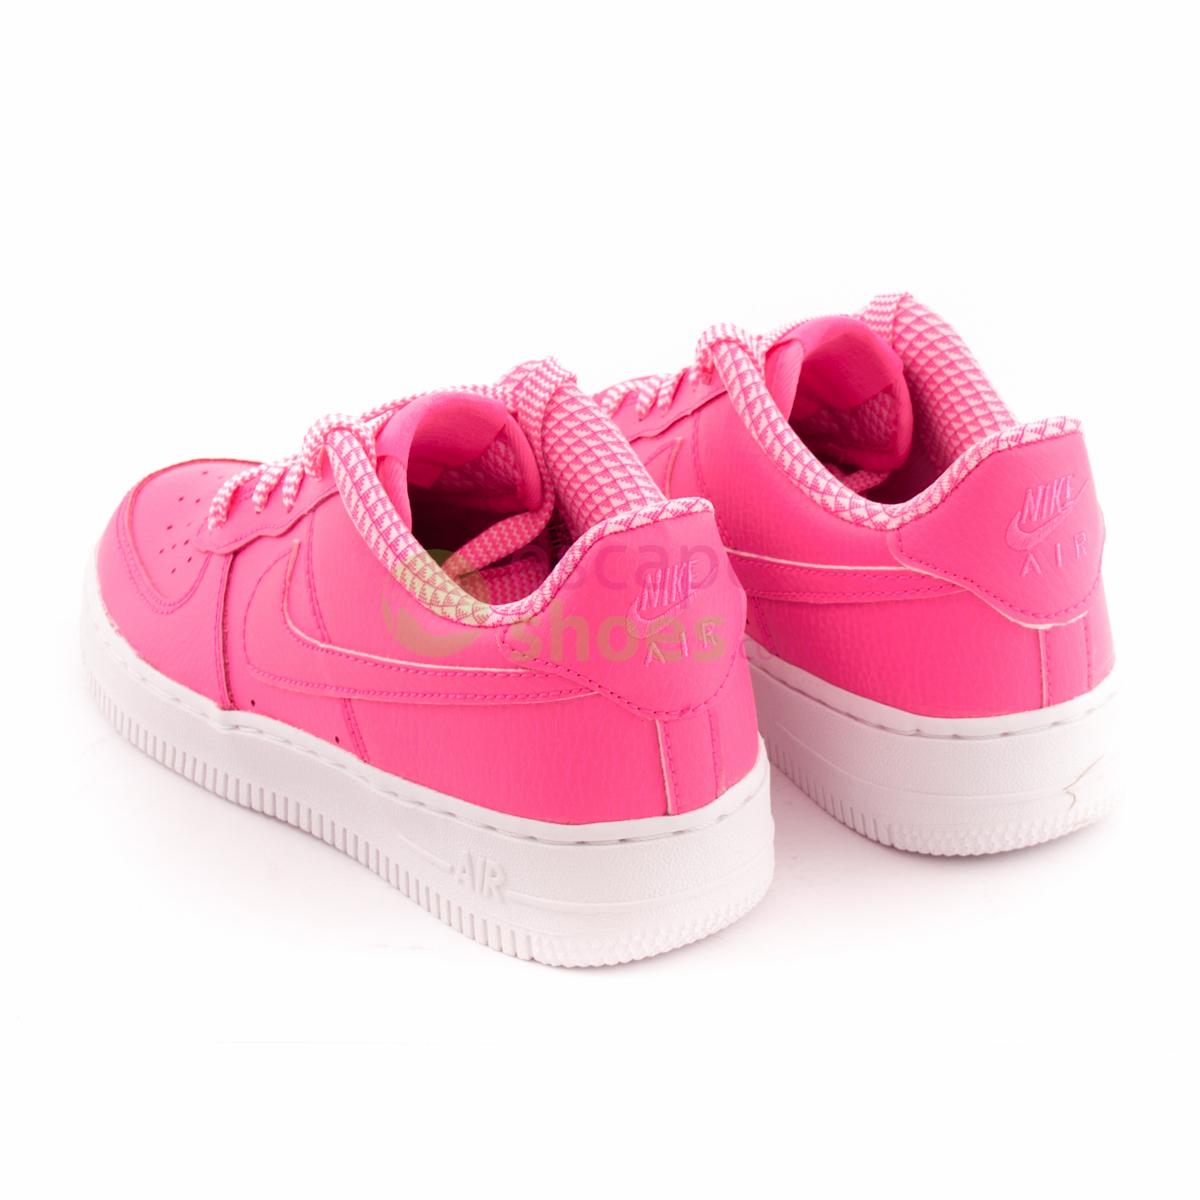 nike air force rosa fluorescente